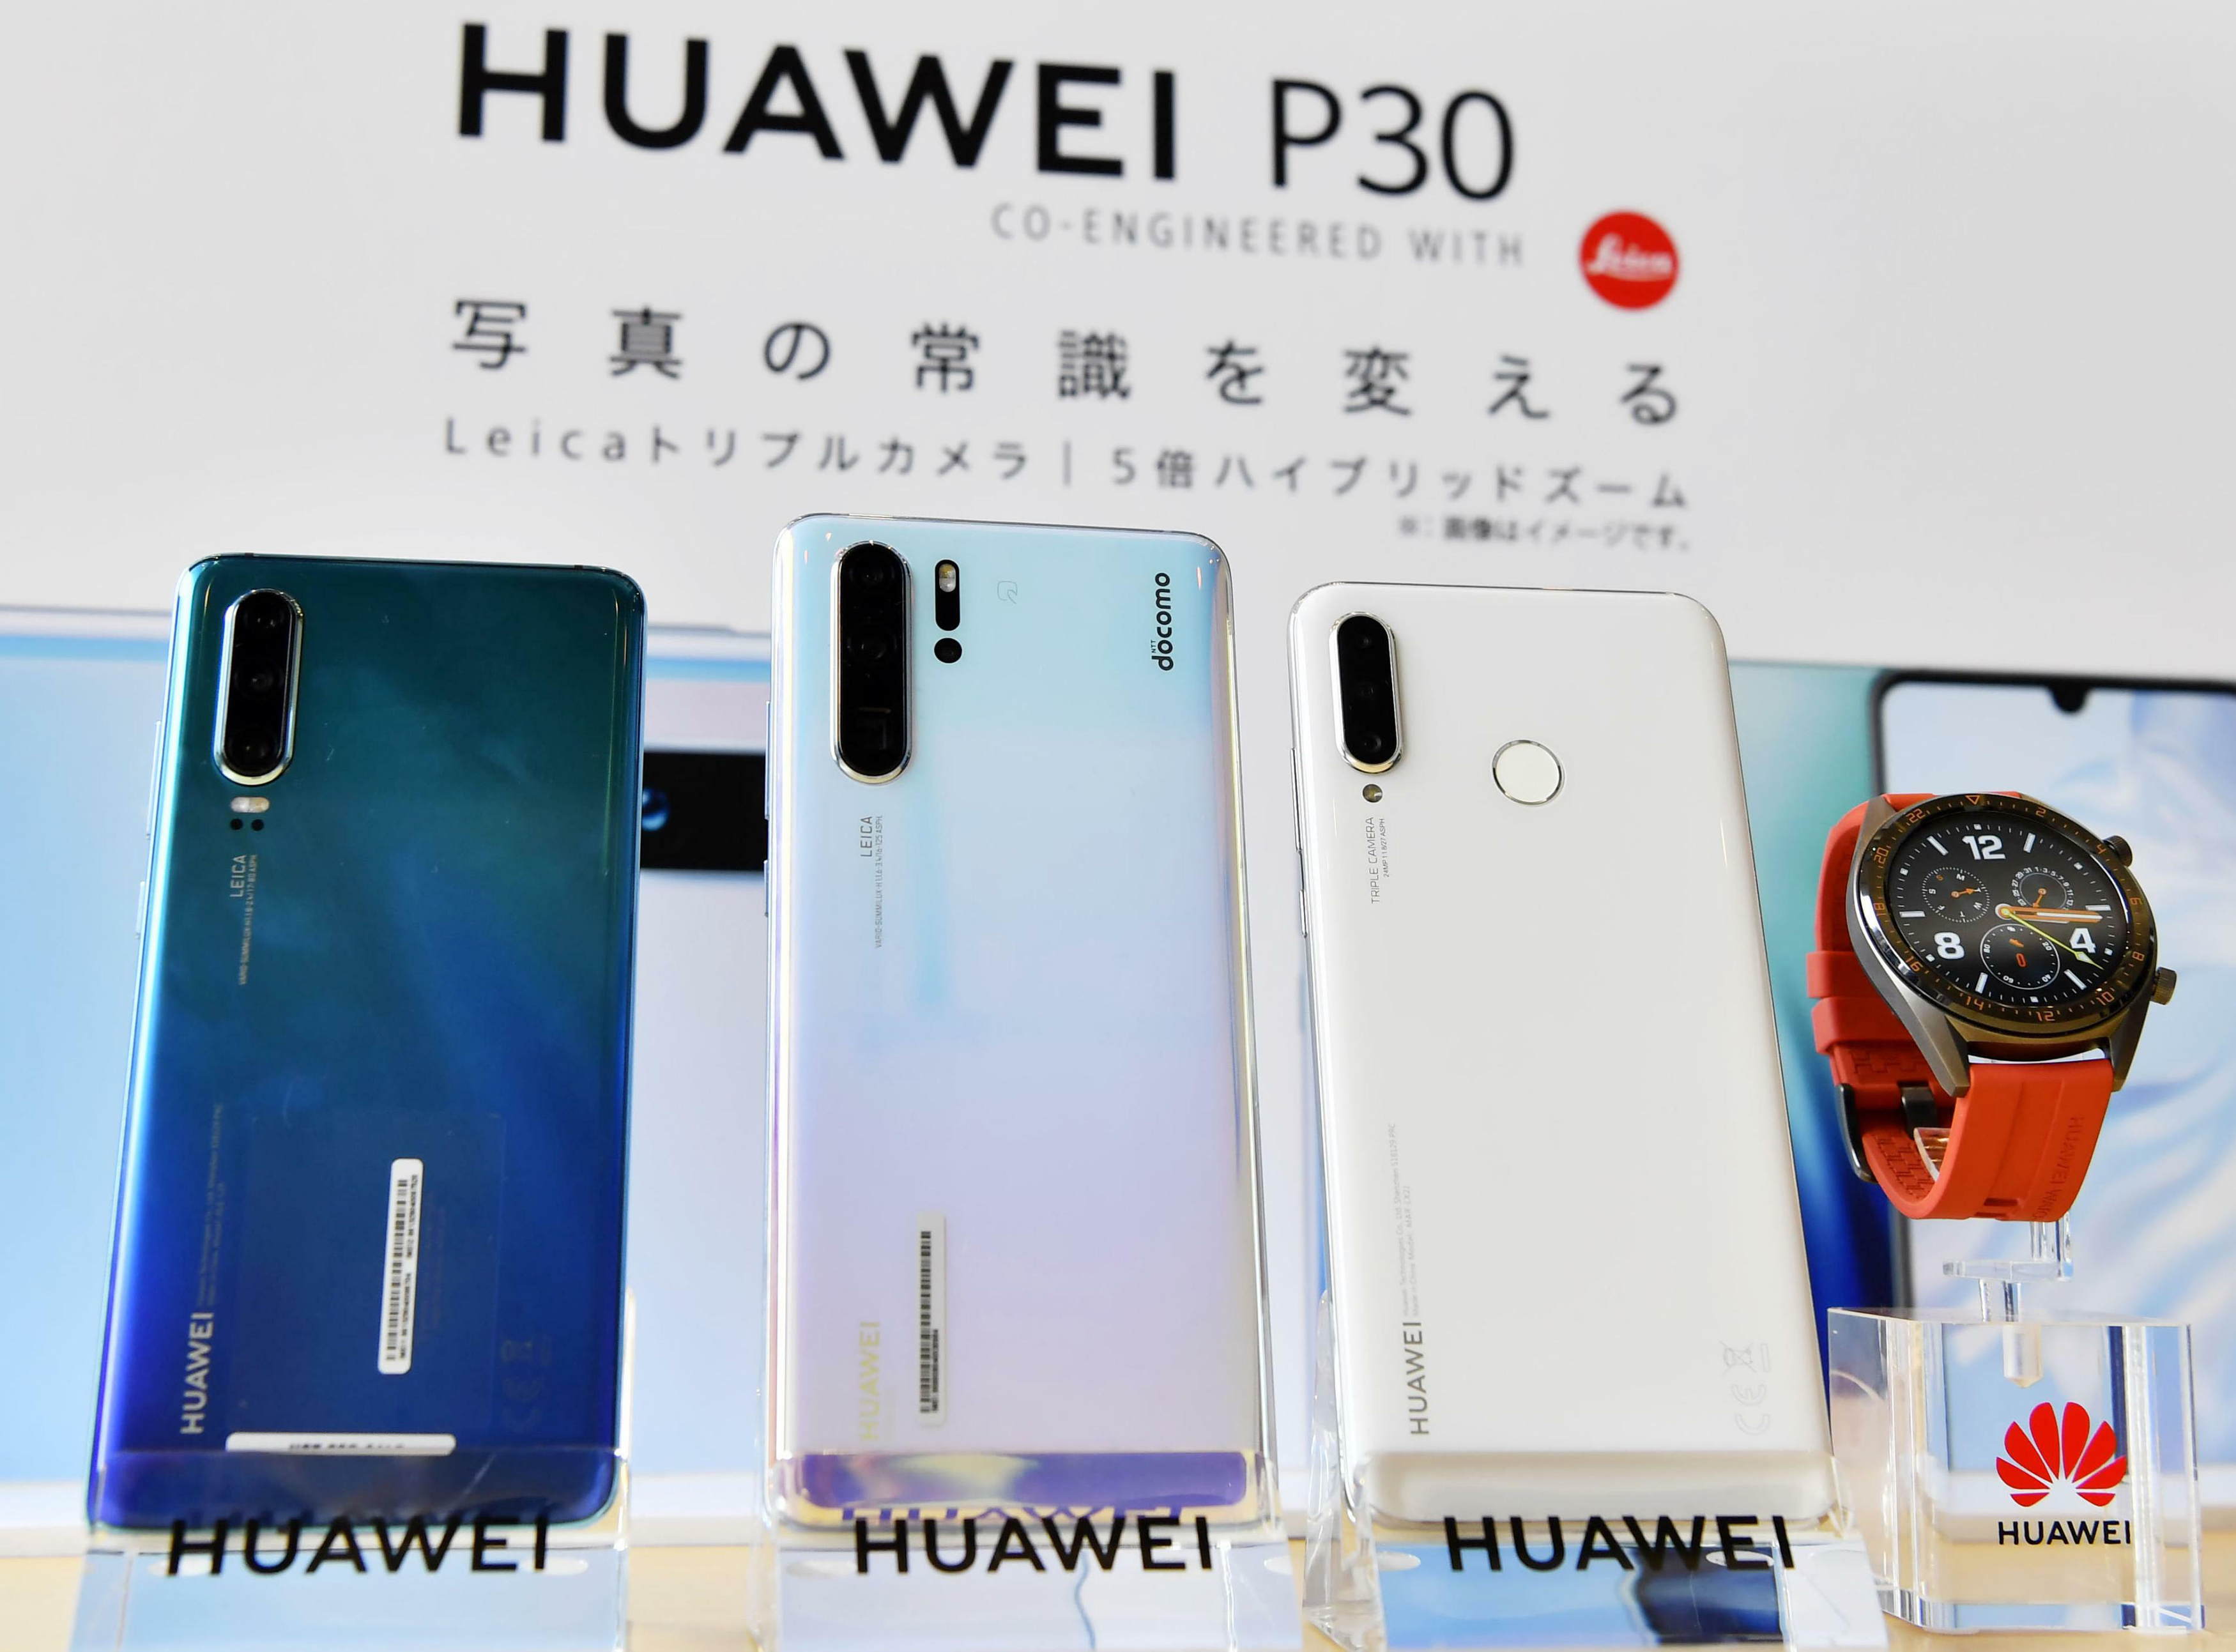 jammer legal nurse firms - UK, Japan Mobile Operators Suspend Huawei 5G Phone Launches